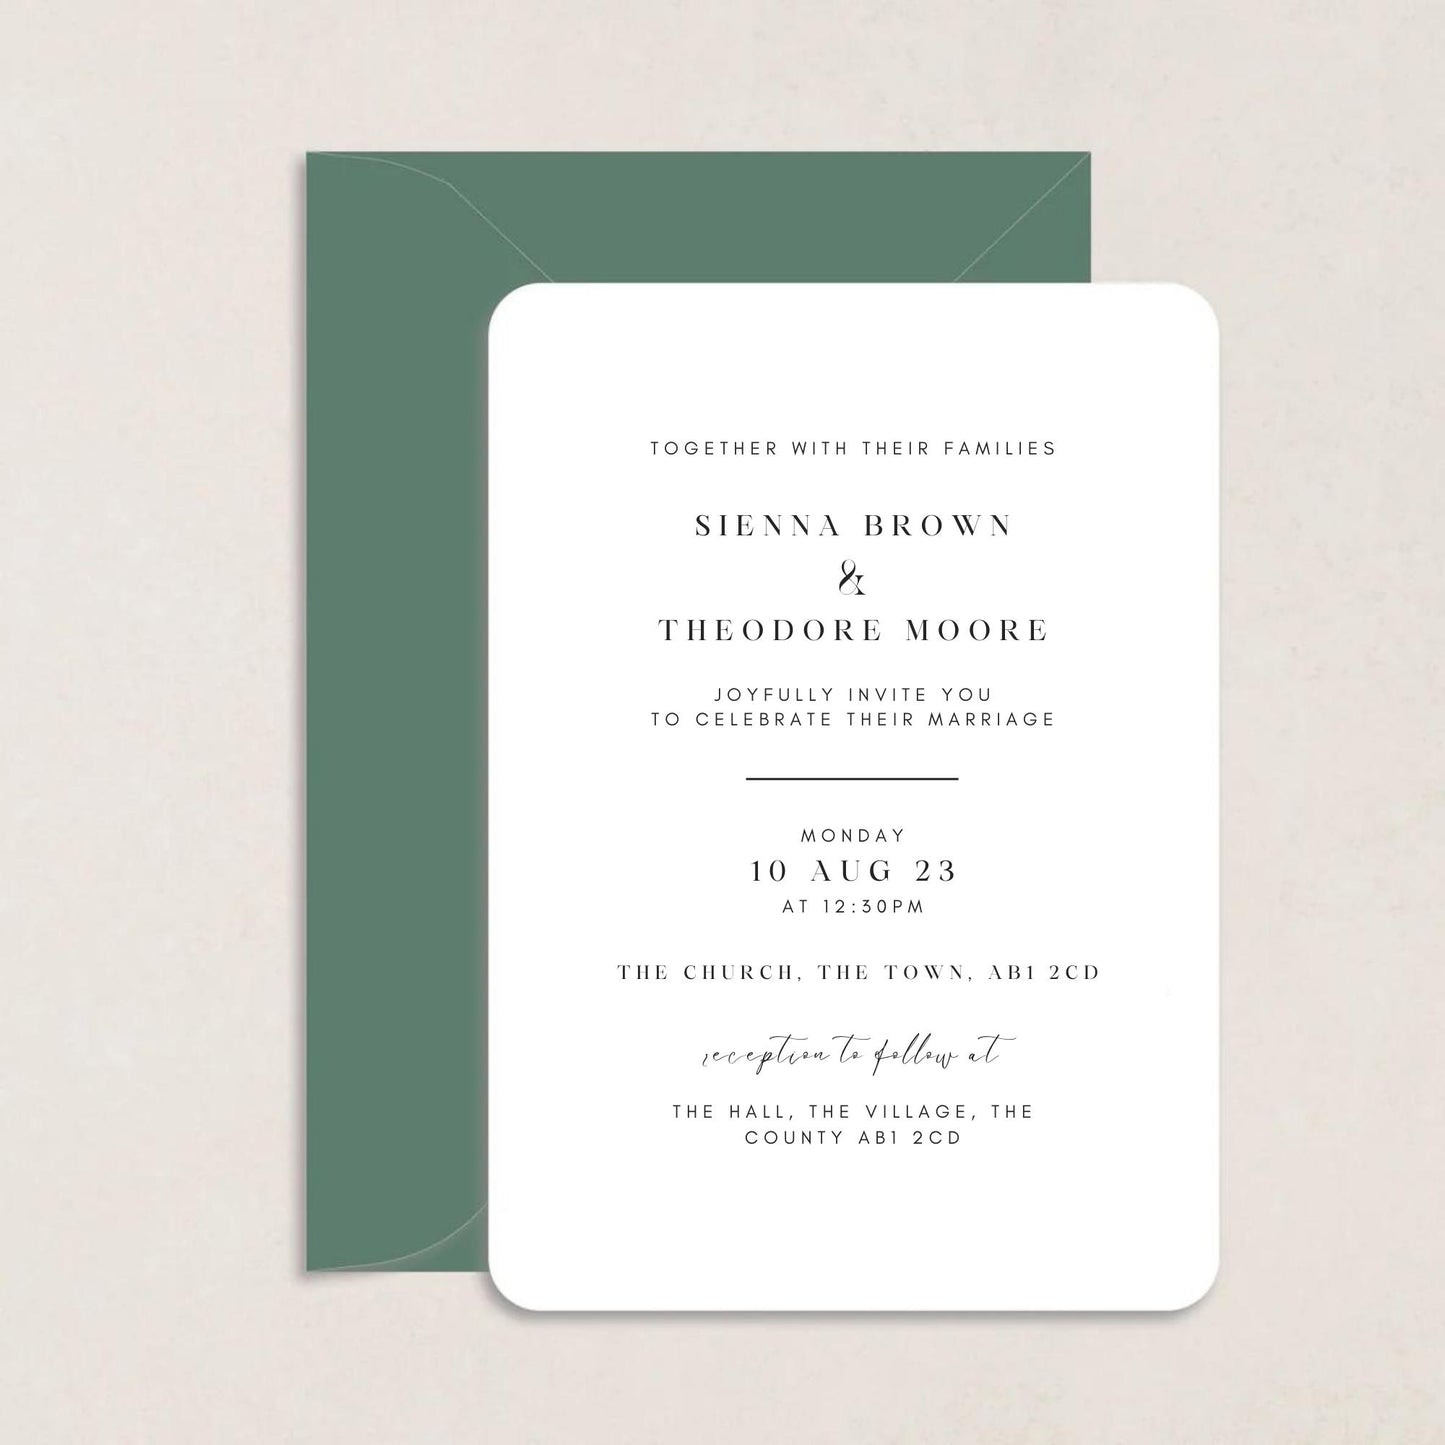 Sienna Wedding Invitations - Wedding Invitations available at The Ivy Collection | Luxury Wedding Stationery